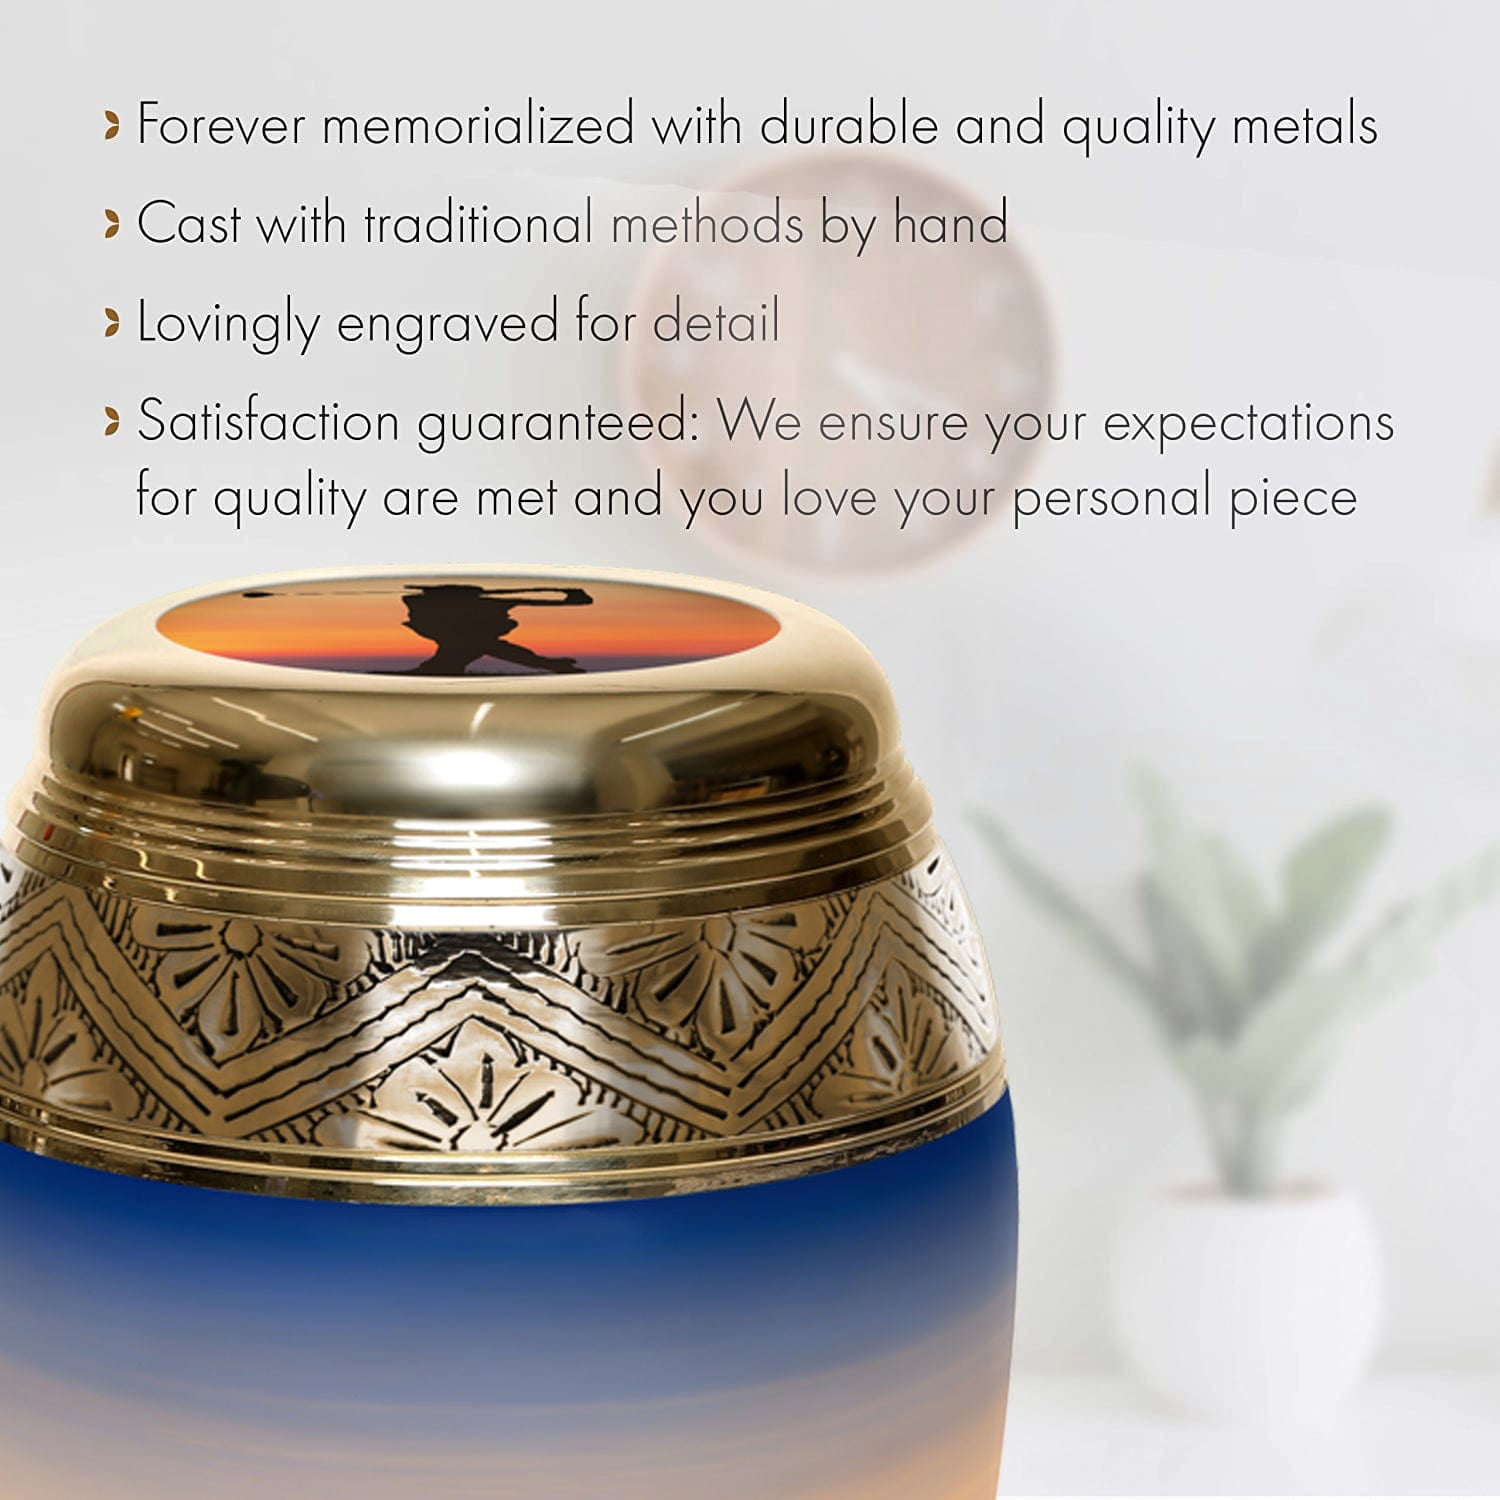 How to Plan a Celebration of Life Service » Urns